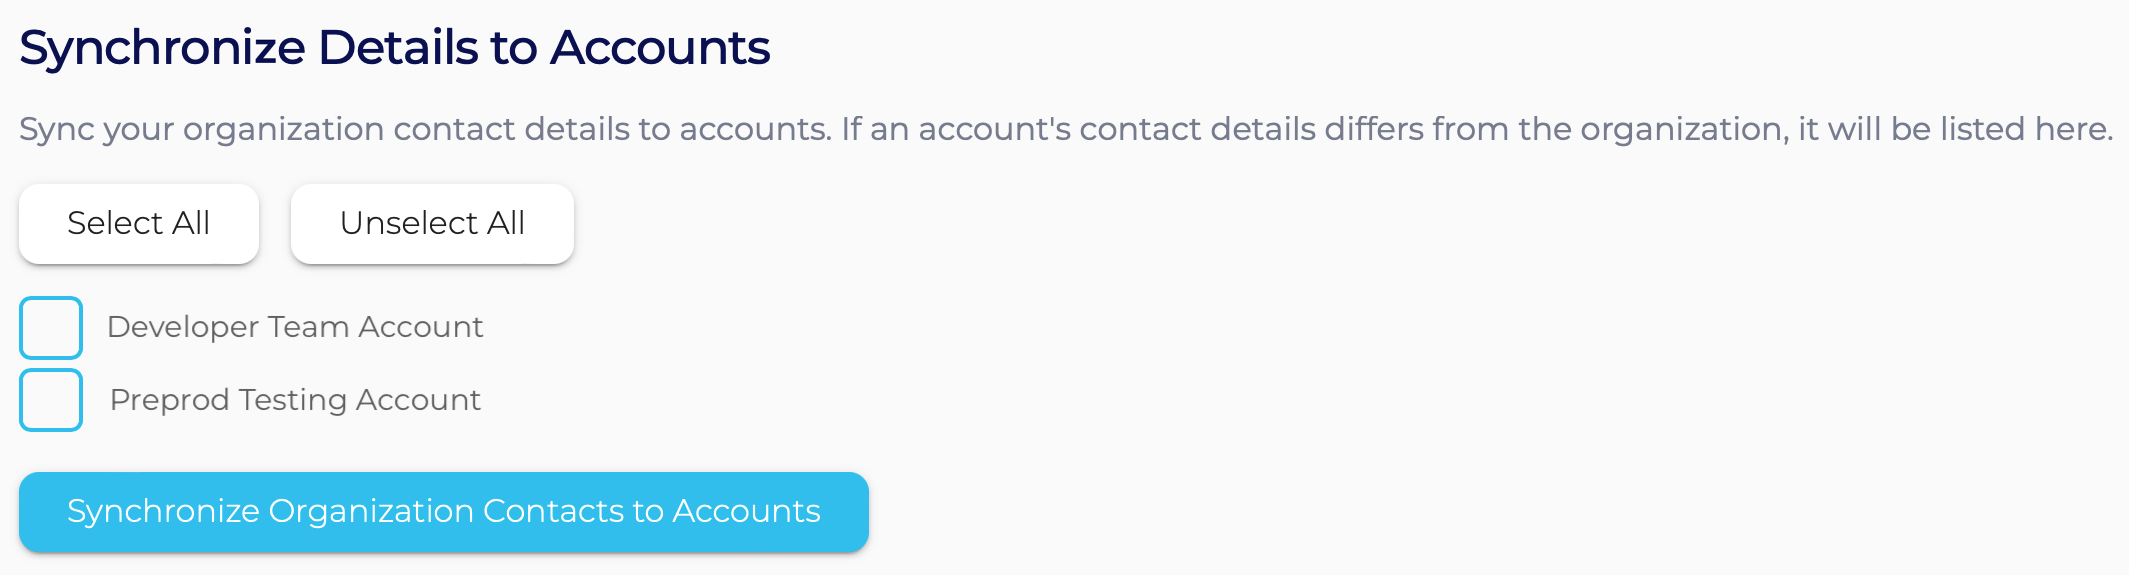 Select individual accounts or select all accounts to synchronize details with